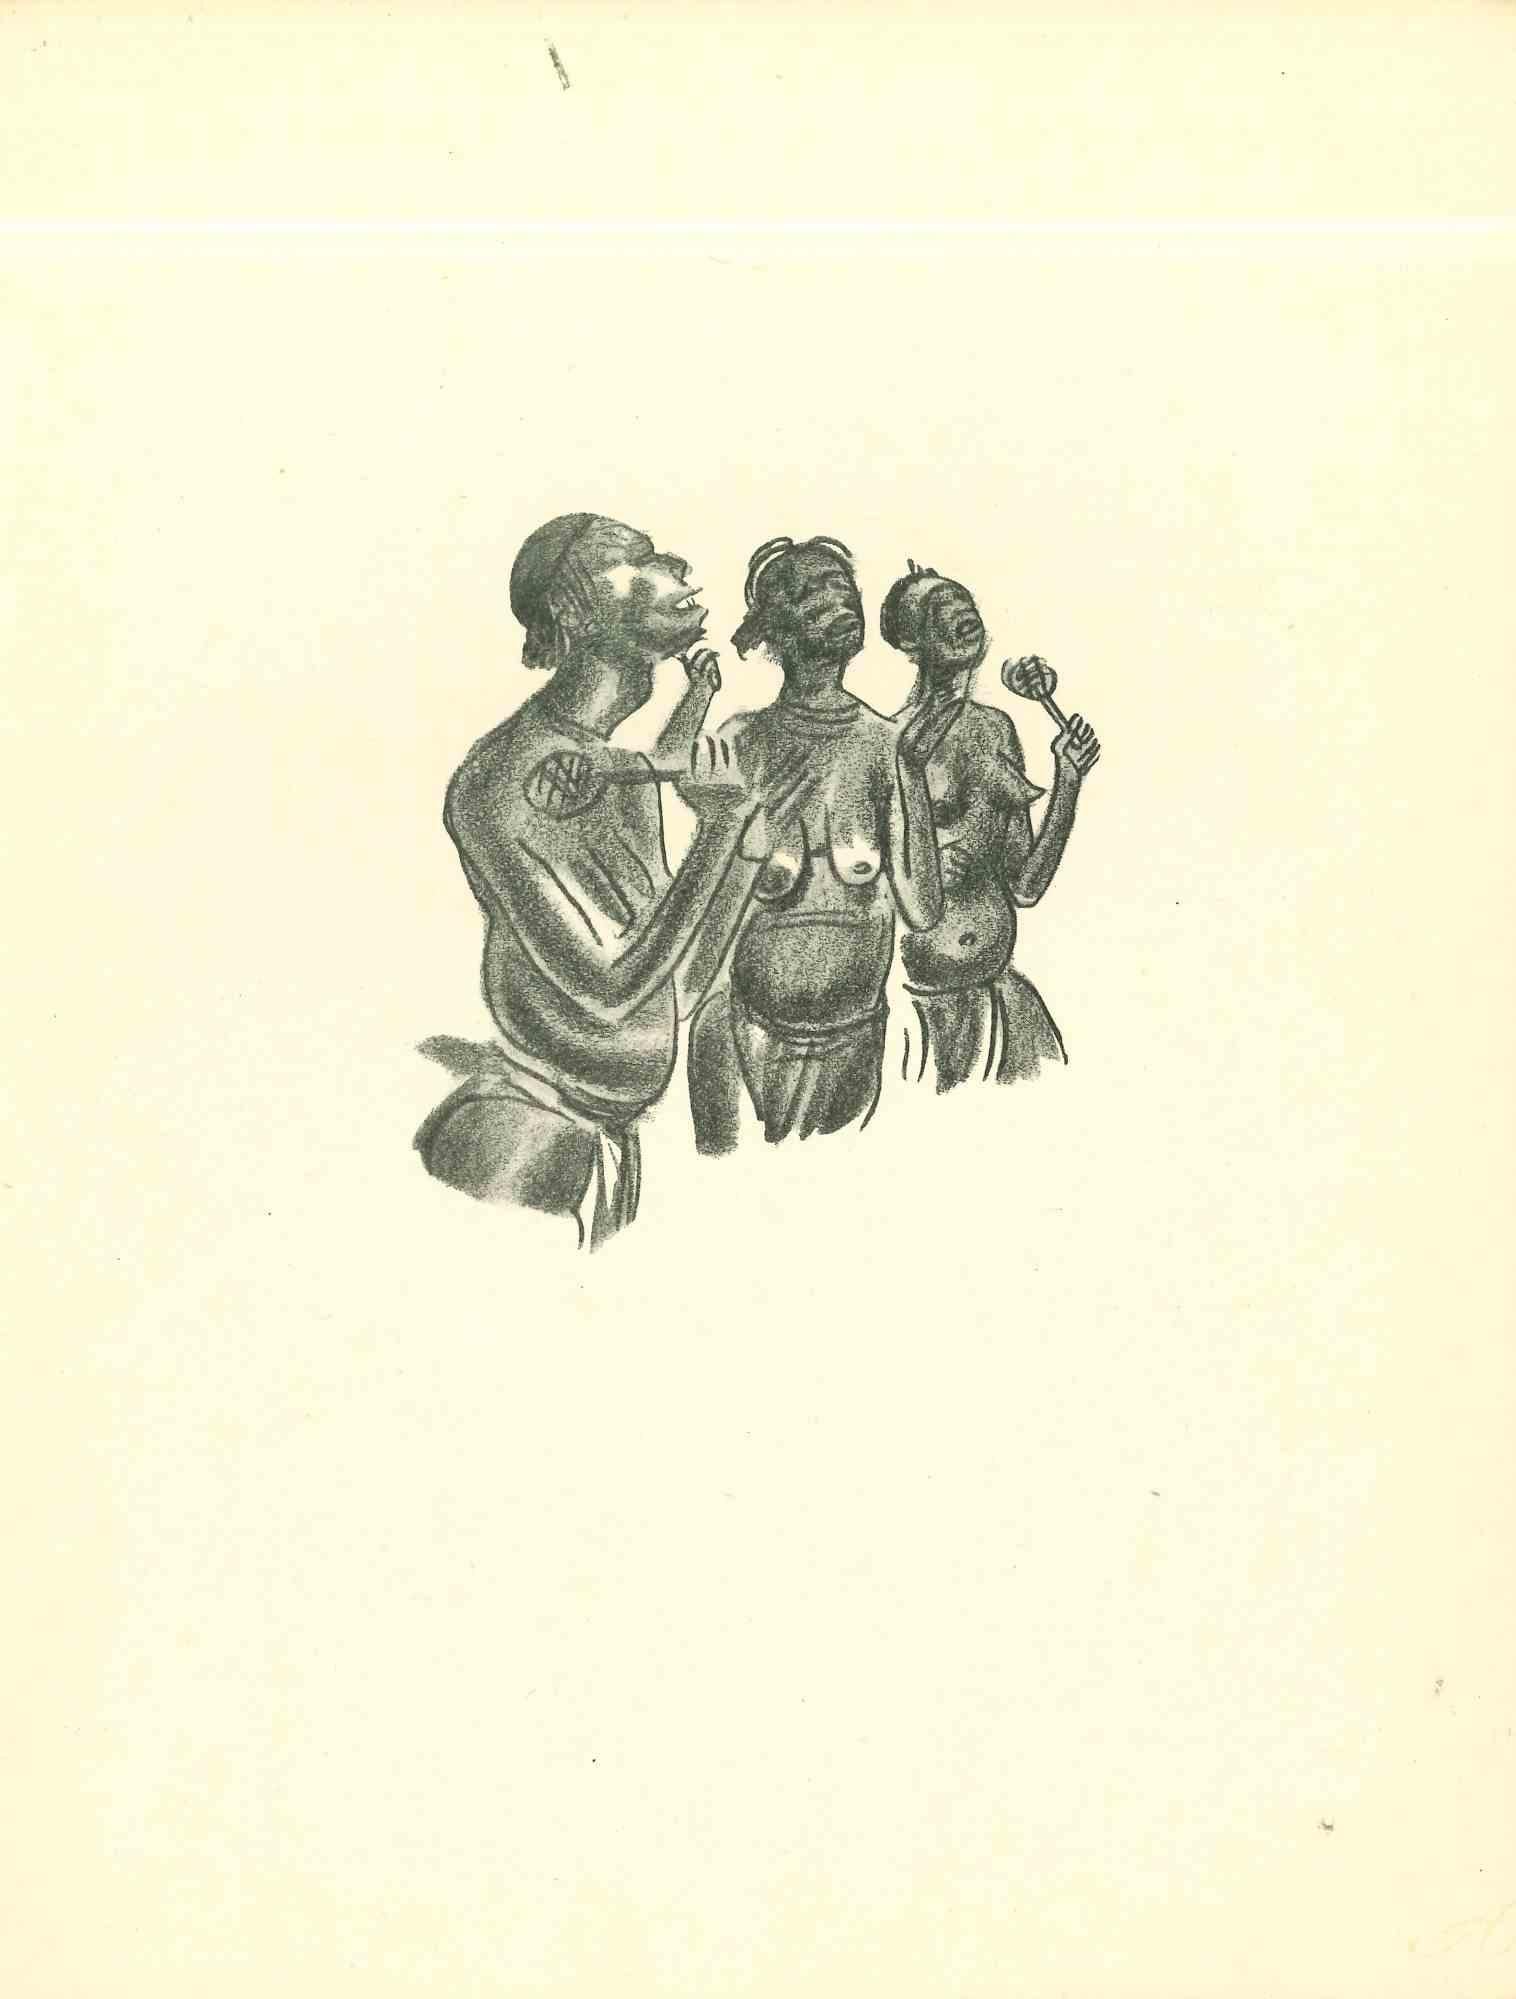 Collective Dance is an original lithograph realized in the early 1930s by Emmanuel Gondouin, (Versailles, 1883 - Parigi, 1934) 
 
The artwork is depicted through strong strokes and is part of a series entitled "Africa". 
 
 
Emmanuel Gondouin is a